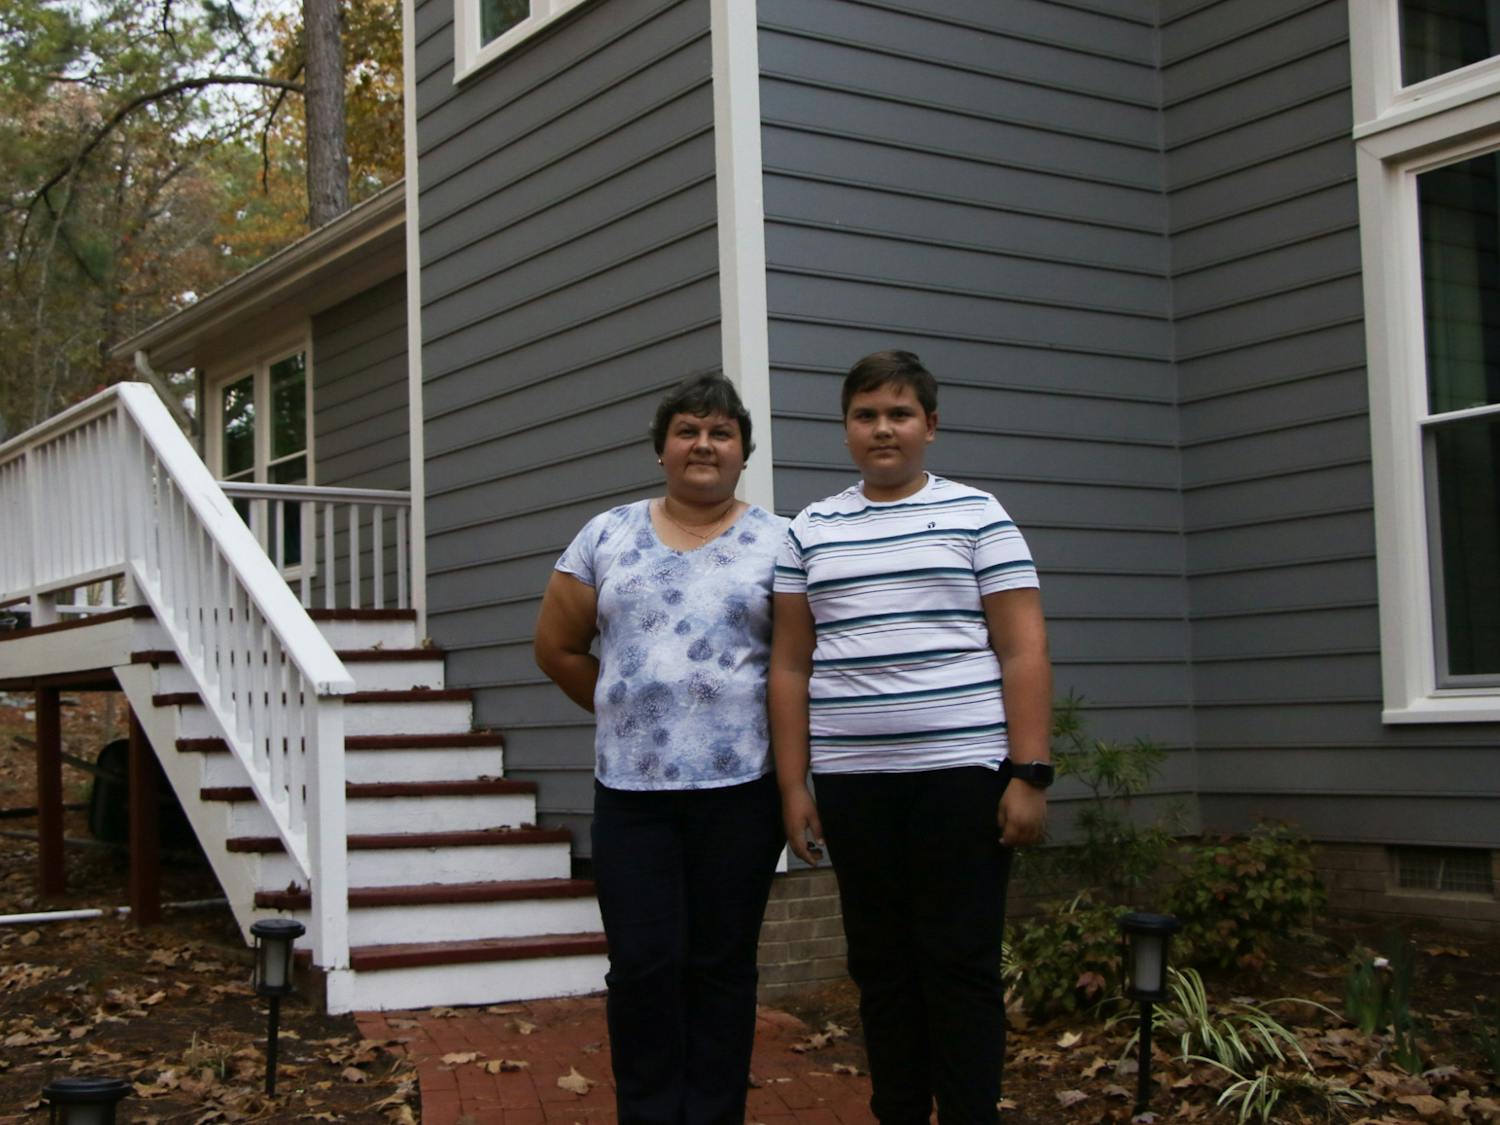 Liuda Skorlupina and her son Zhenia outside of Liuda's friend's home in Durham, where they are now staying after fleeing the war in Ukraine.&nbsp;